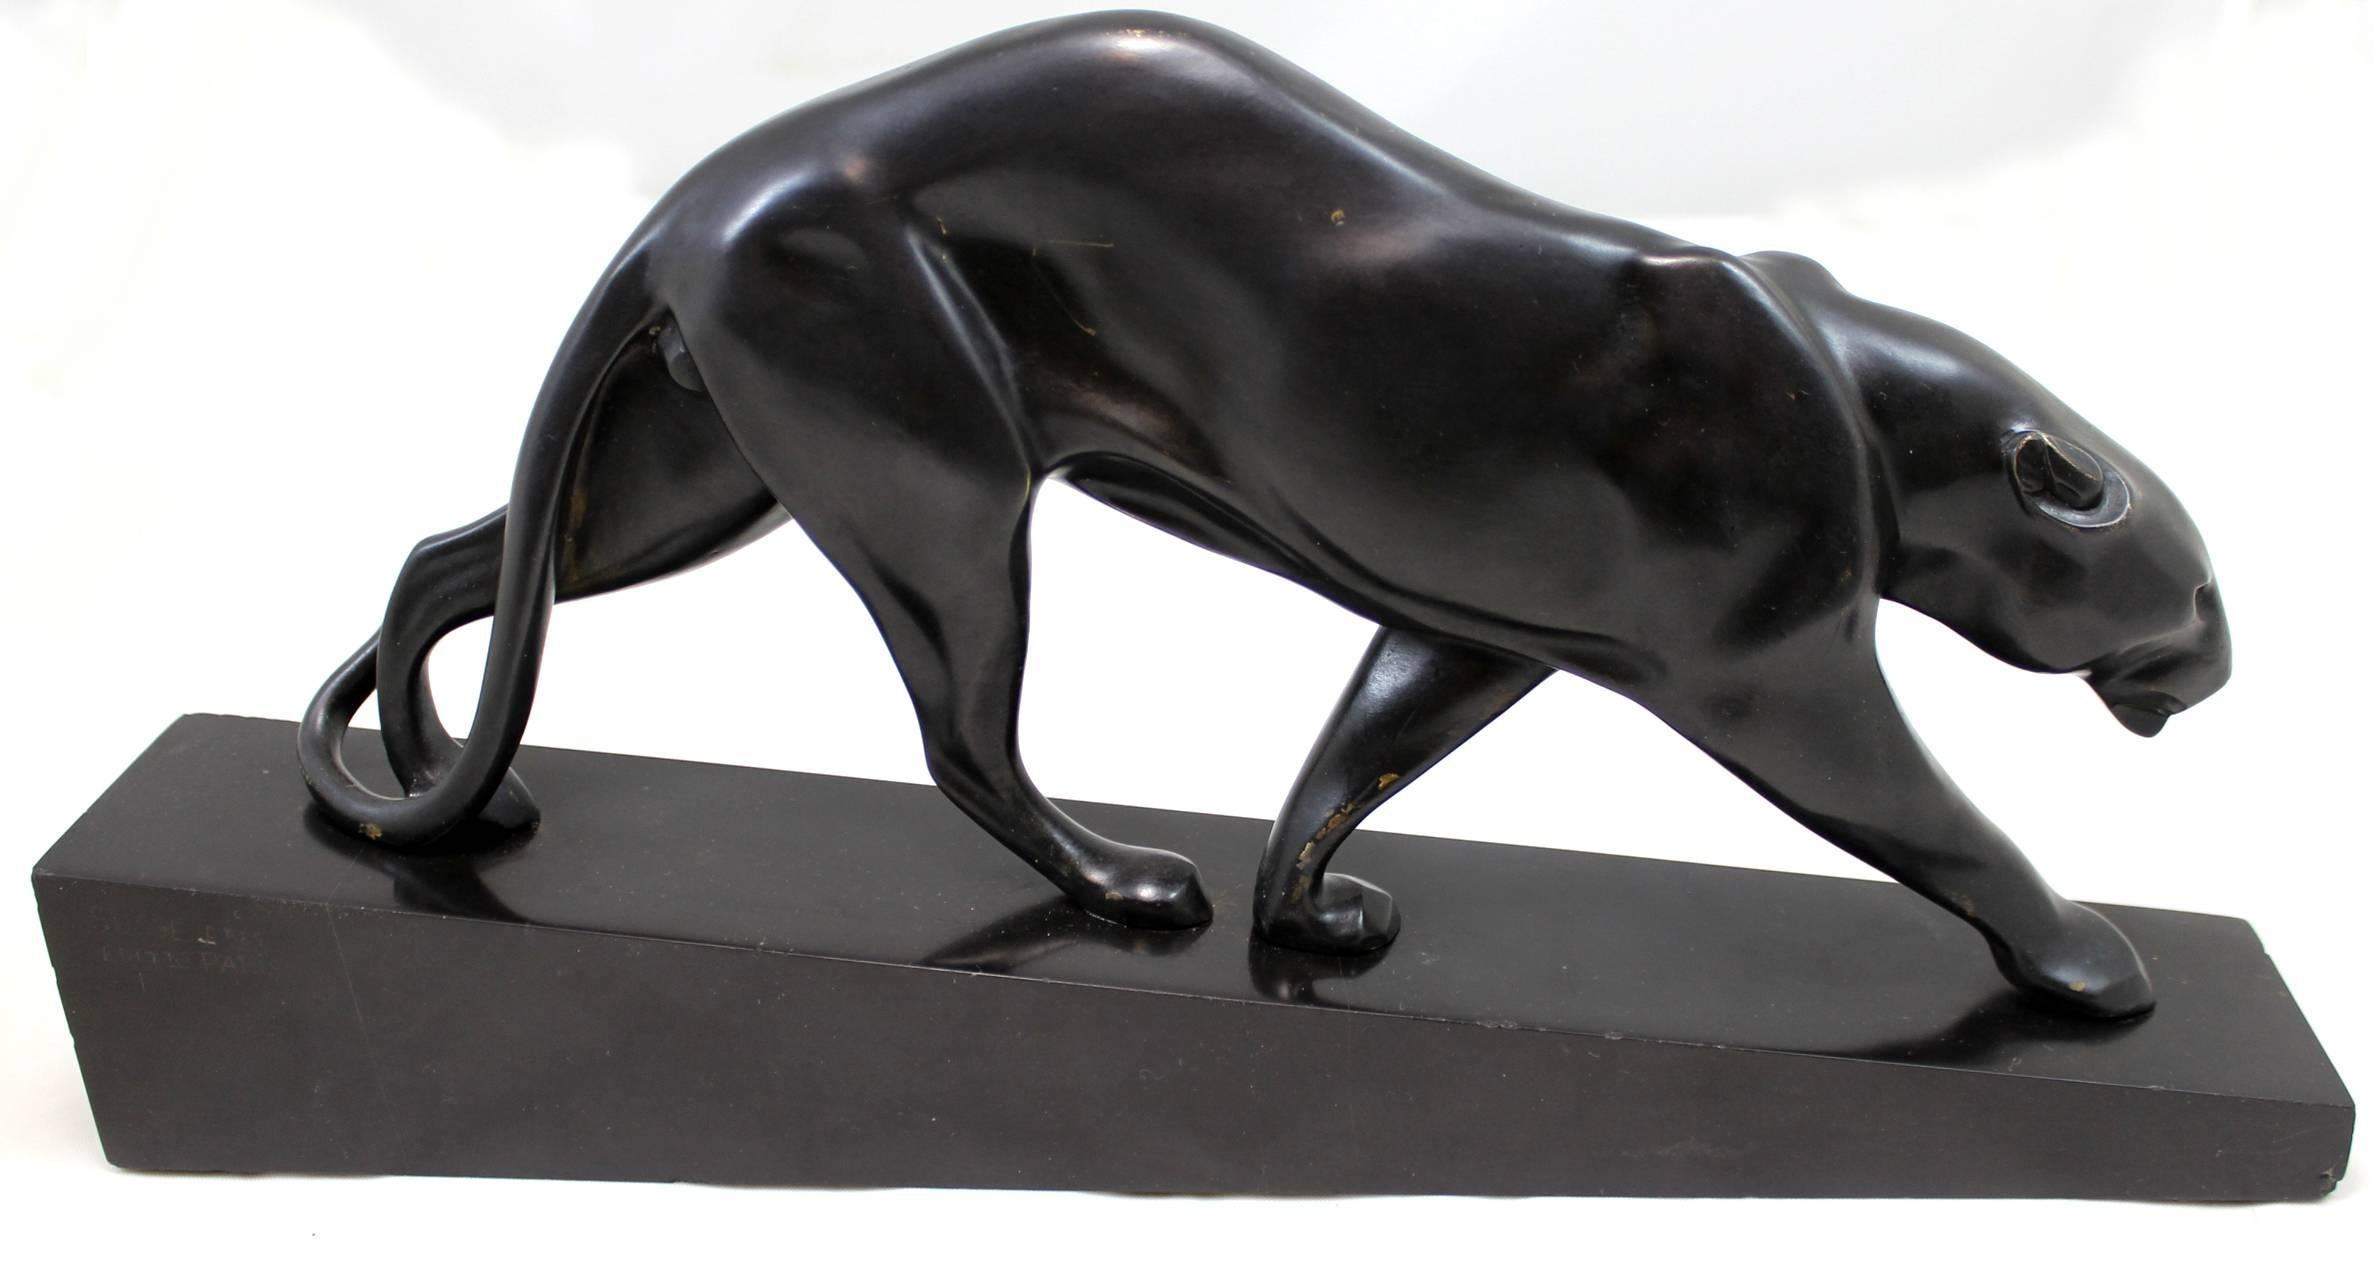 A wonderful patinated cast bronze sculpture of a black panther, titled “Panthere Marchant” by French artist Maurice Gaston Elie Joseph Prost (1894-1967). Prost initially studied under sculptor Léopold Morice and Charles Valton, who strongly